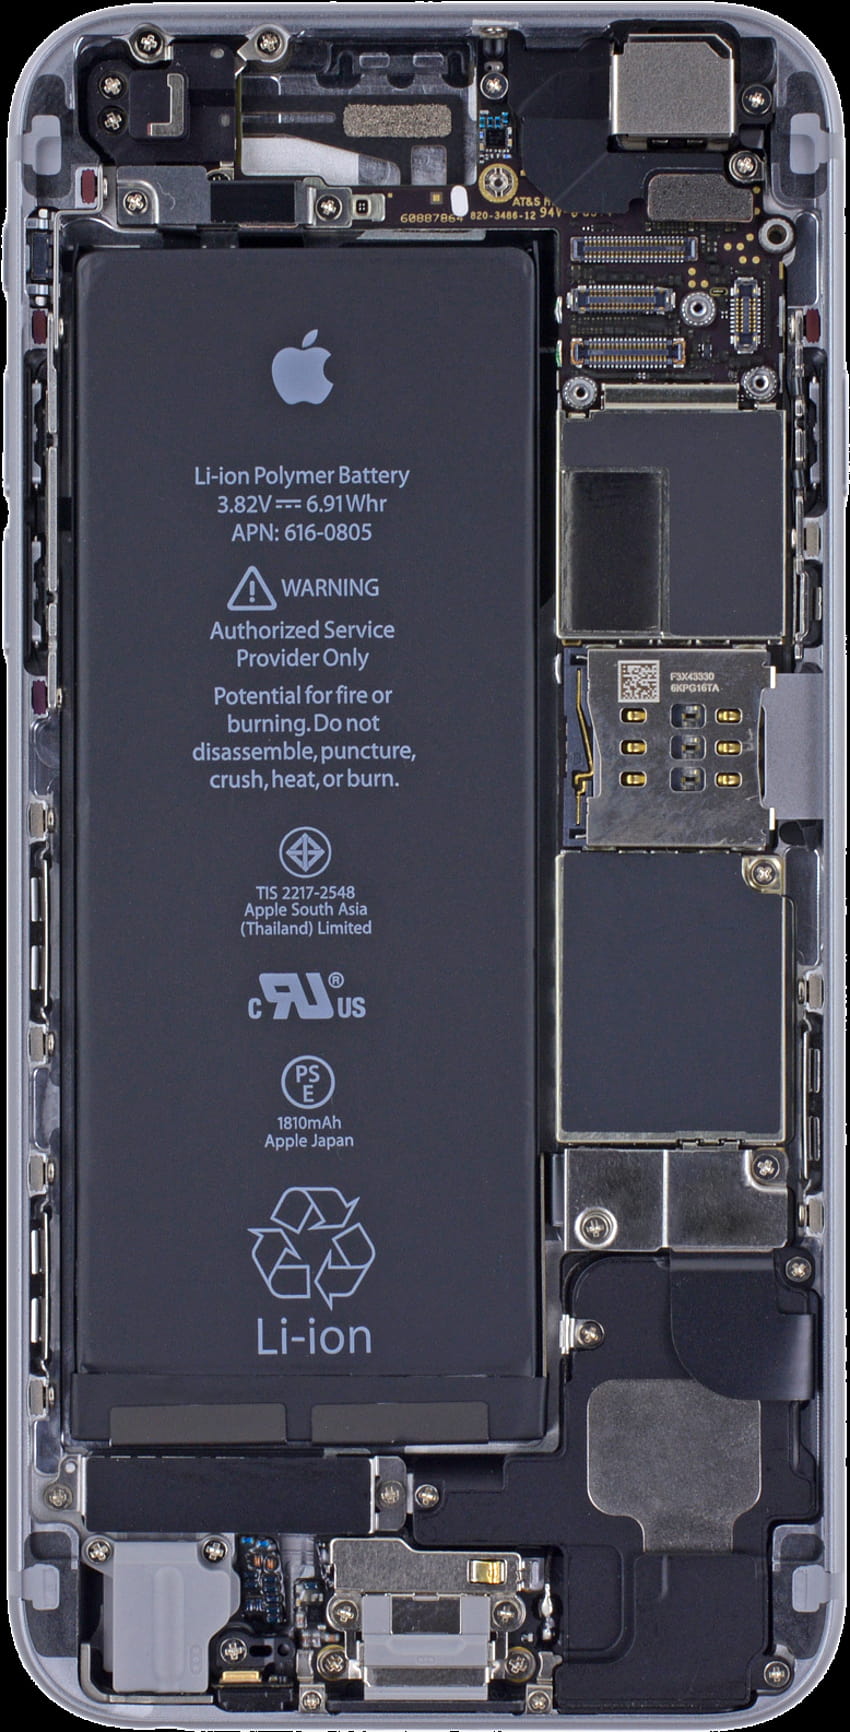 Wallpapers Central  iPhone 12s Internals Download this wallpaper in HD  Full Resolution from httpsifttt3aPAdVT  Facebook